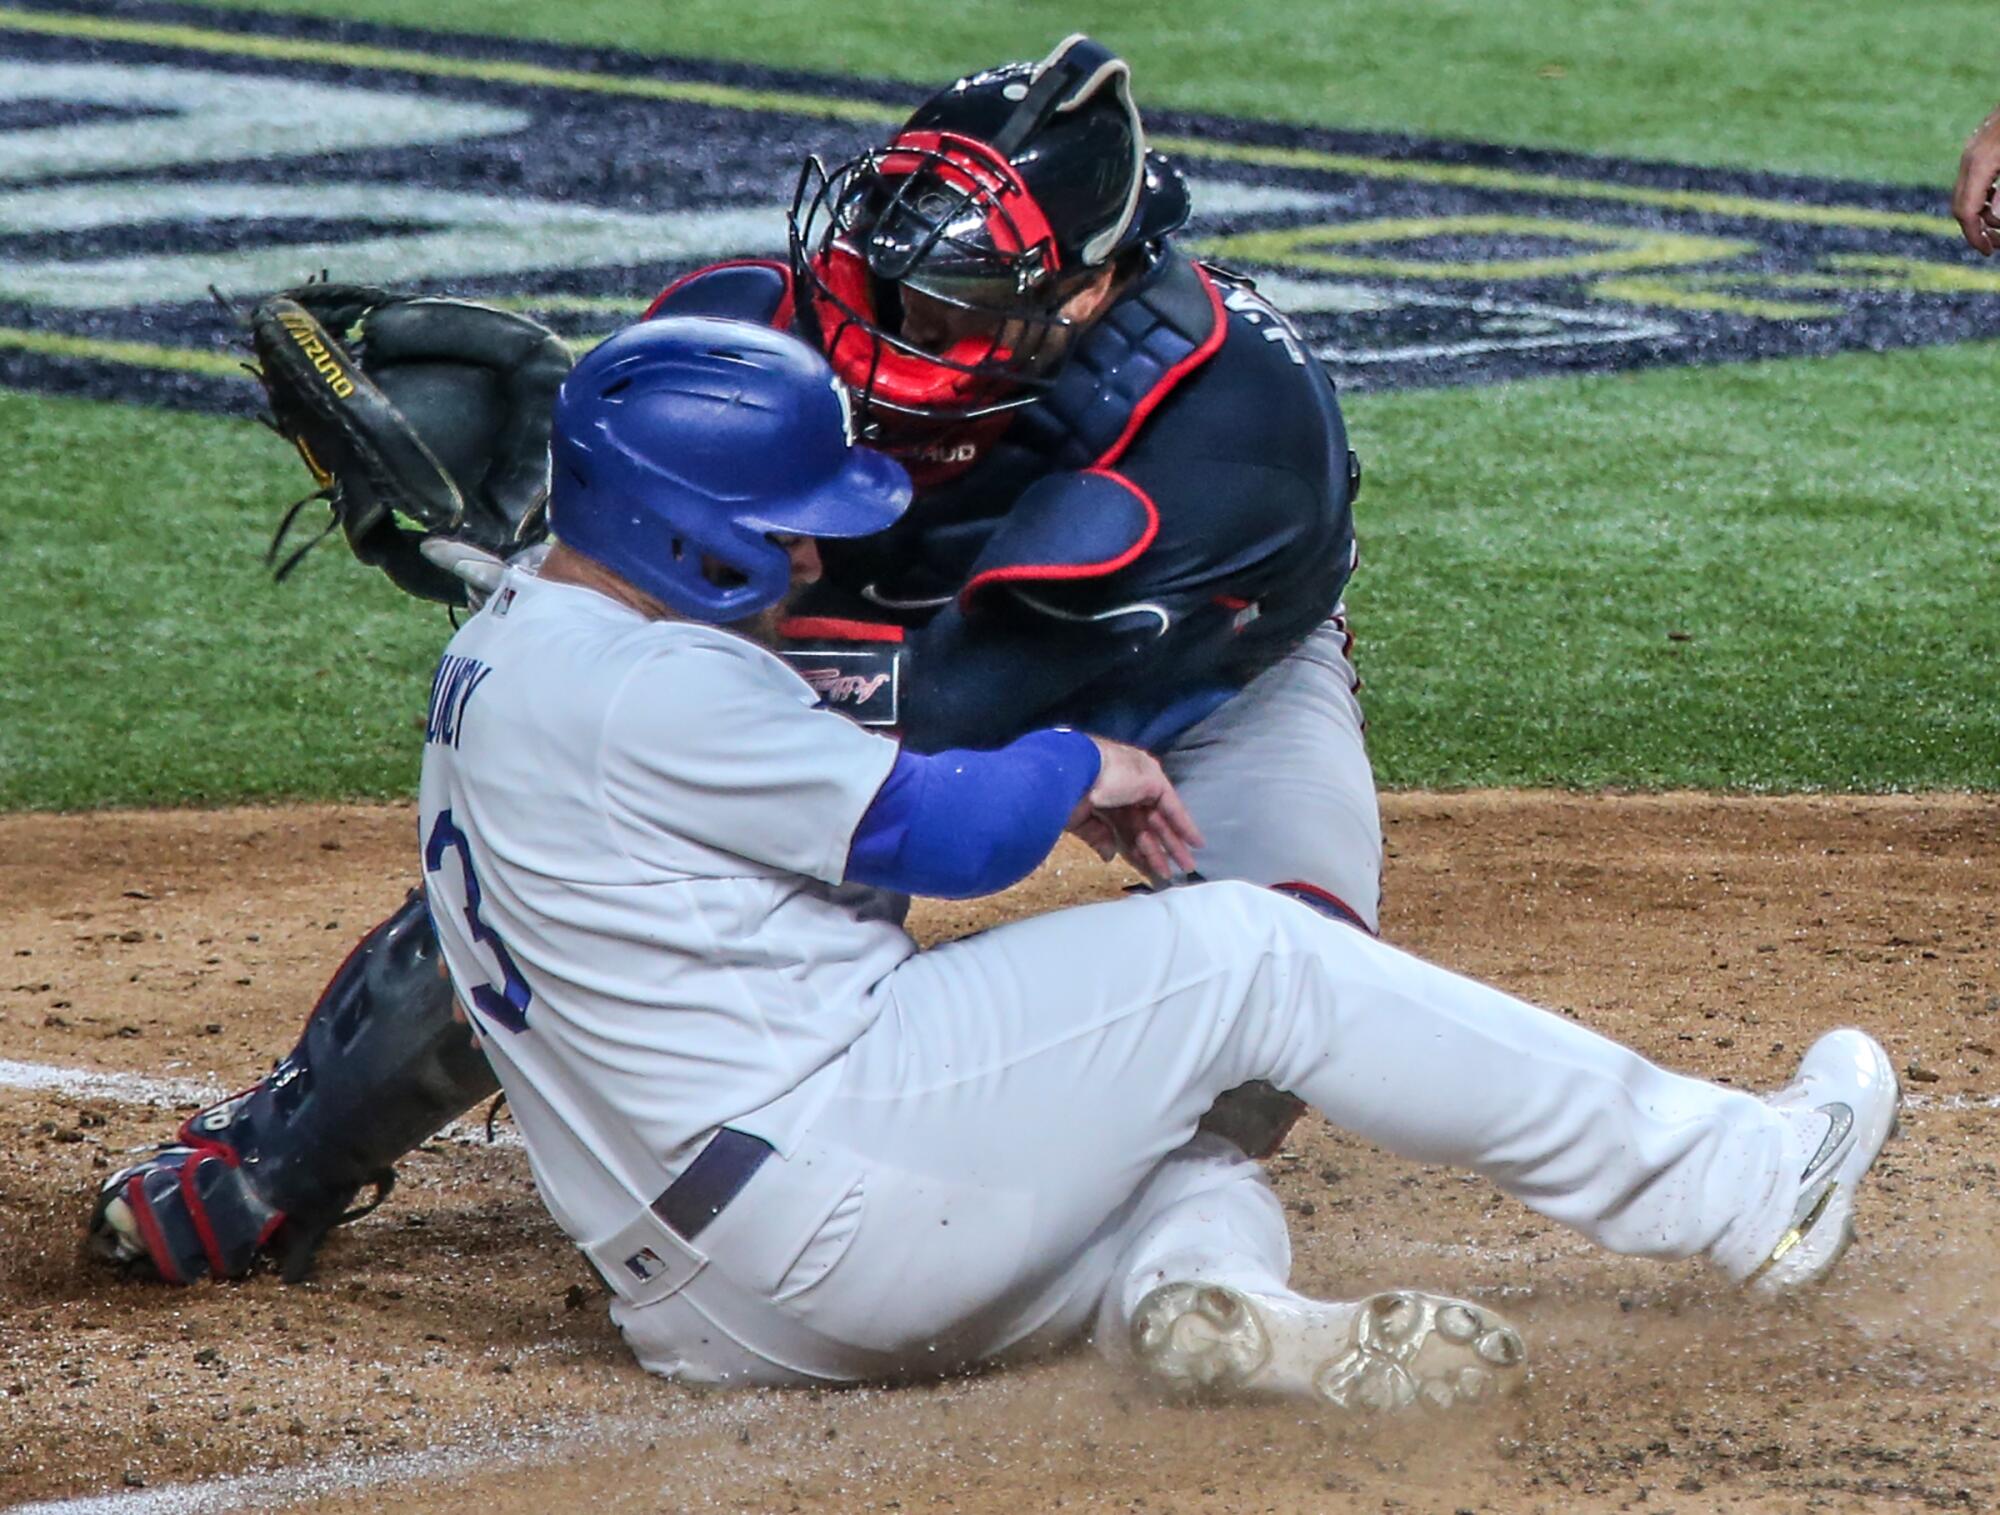 Max Muncy collides with Braves catcher Travis d'Arnaud at home plate.